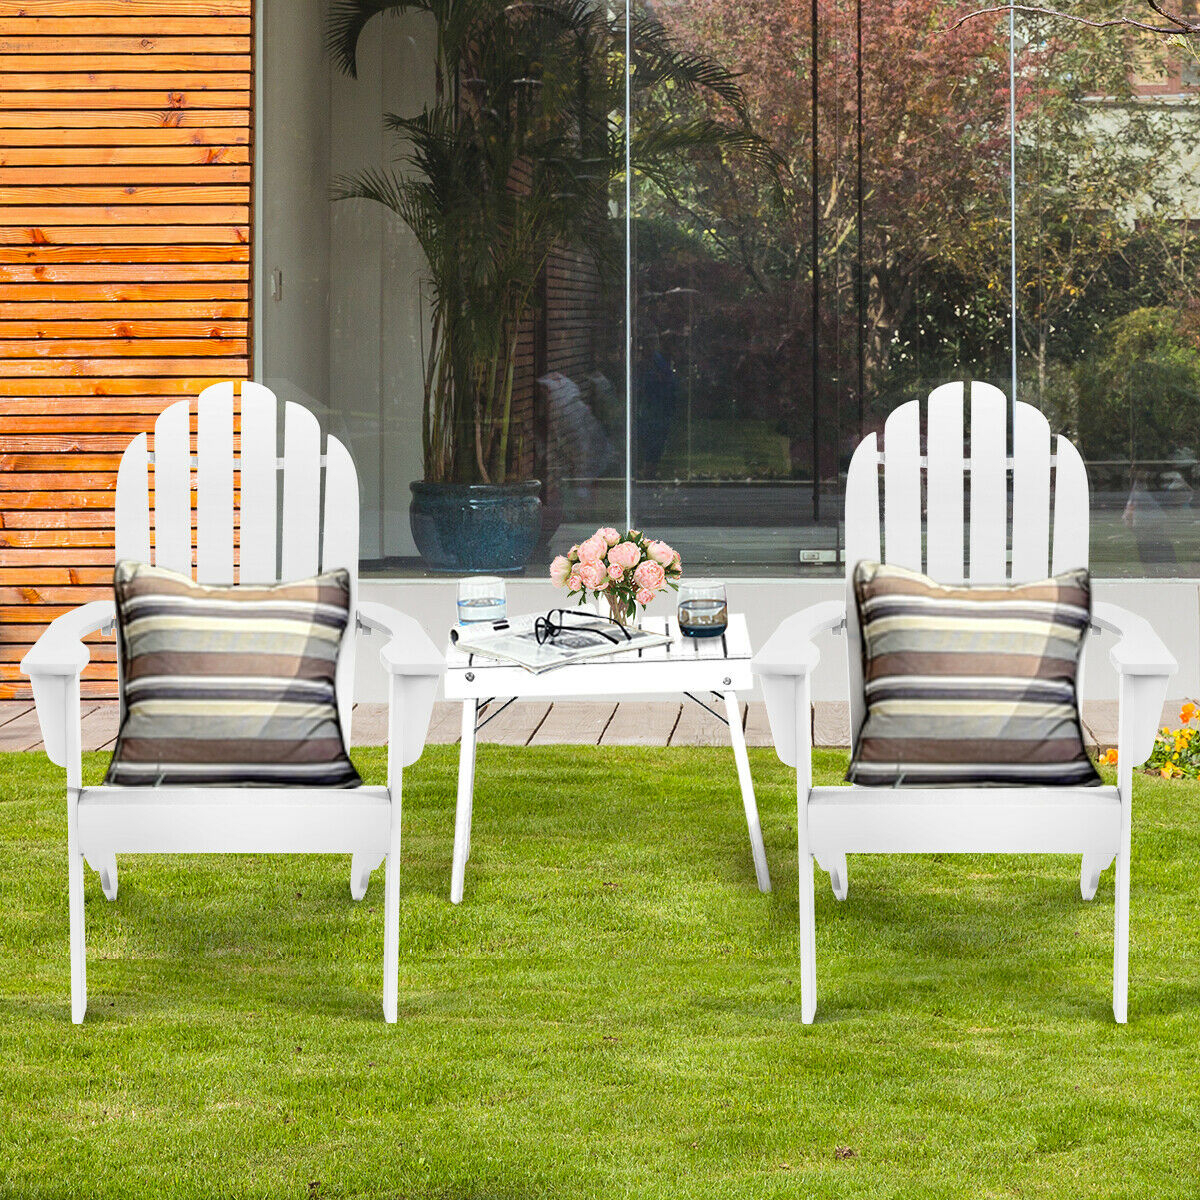 2PCS Wooden Classic Adirondack Chair Lounge Chair Outdoor Patio White